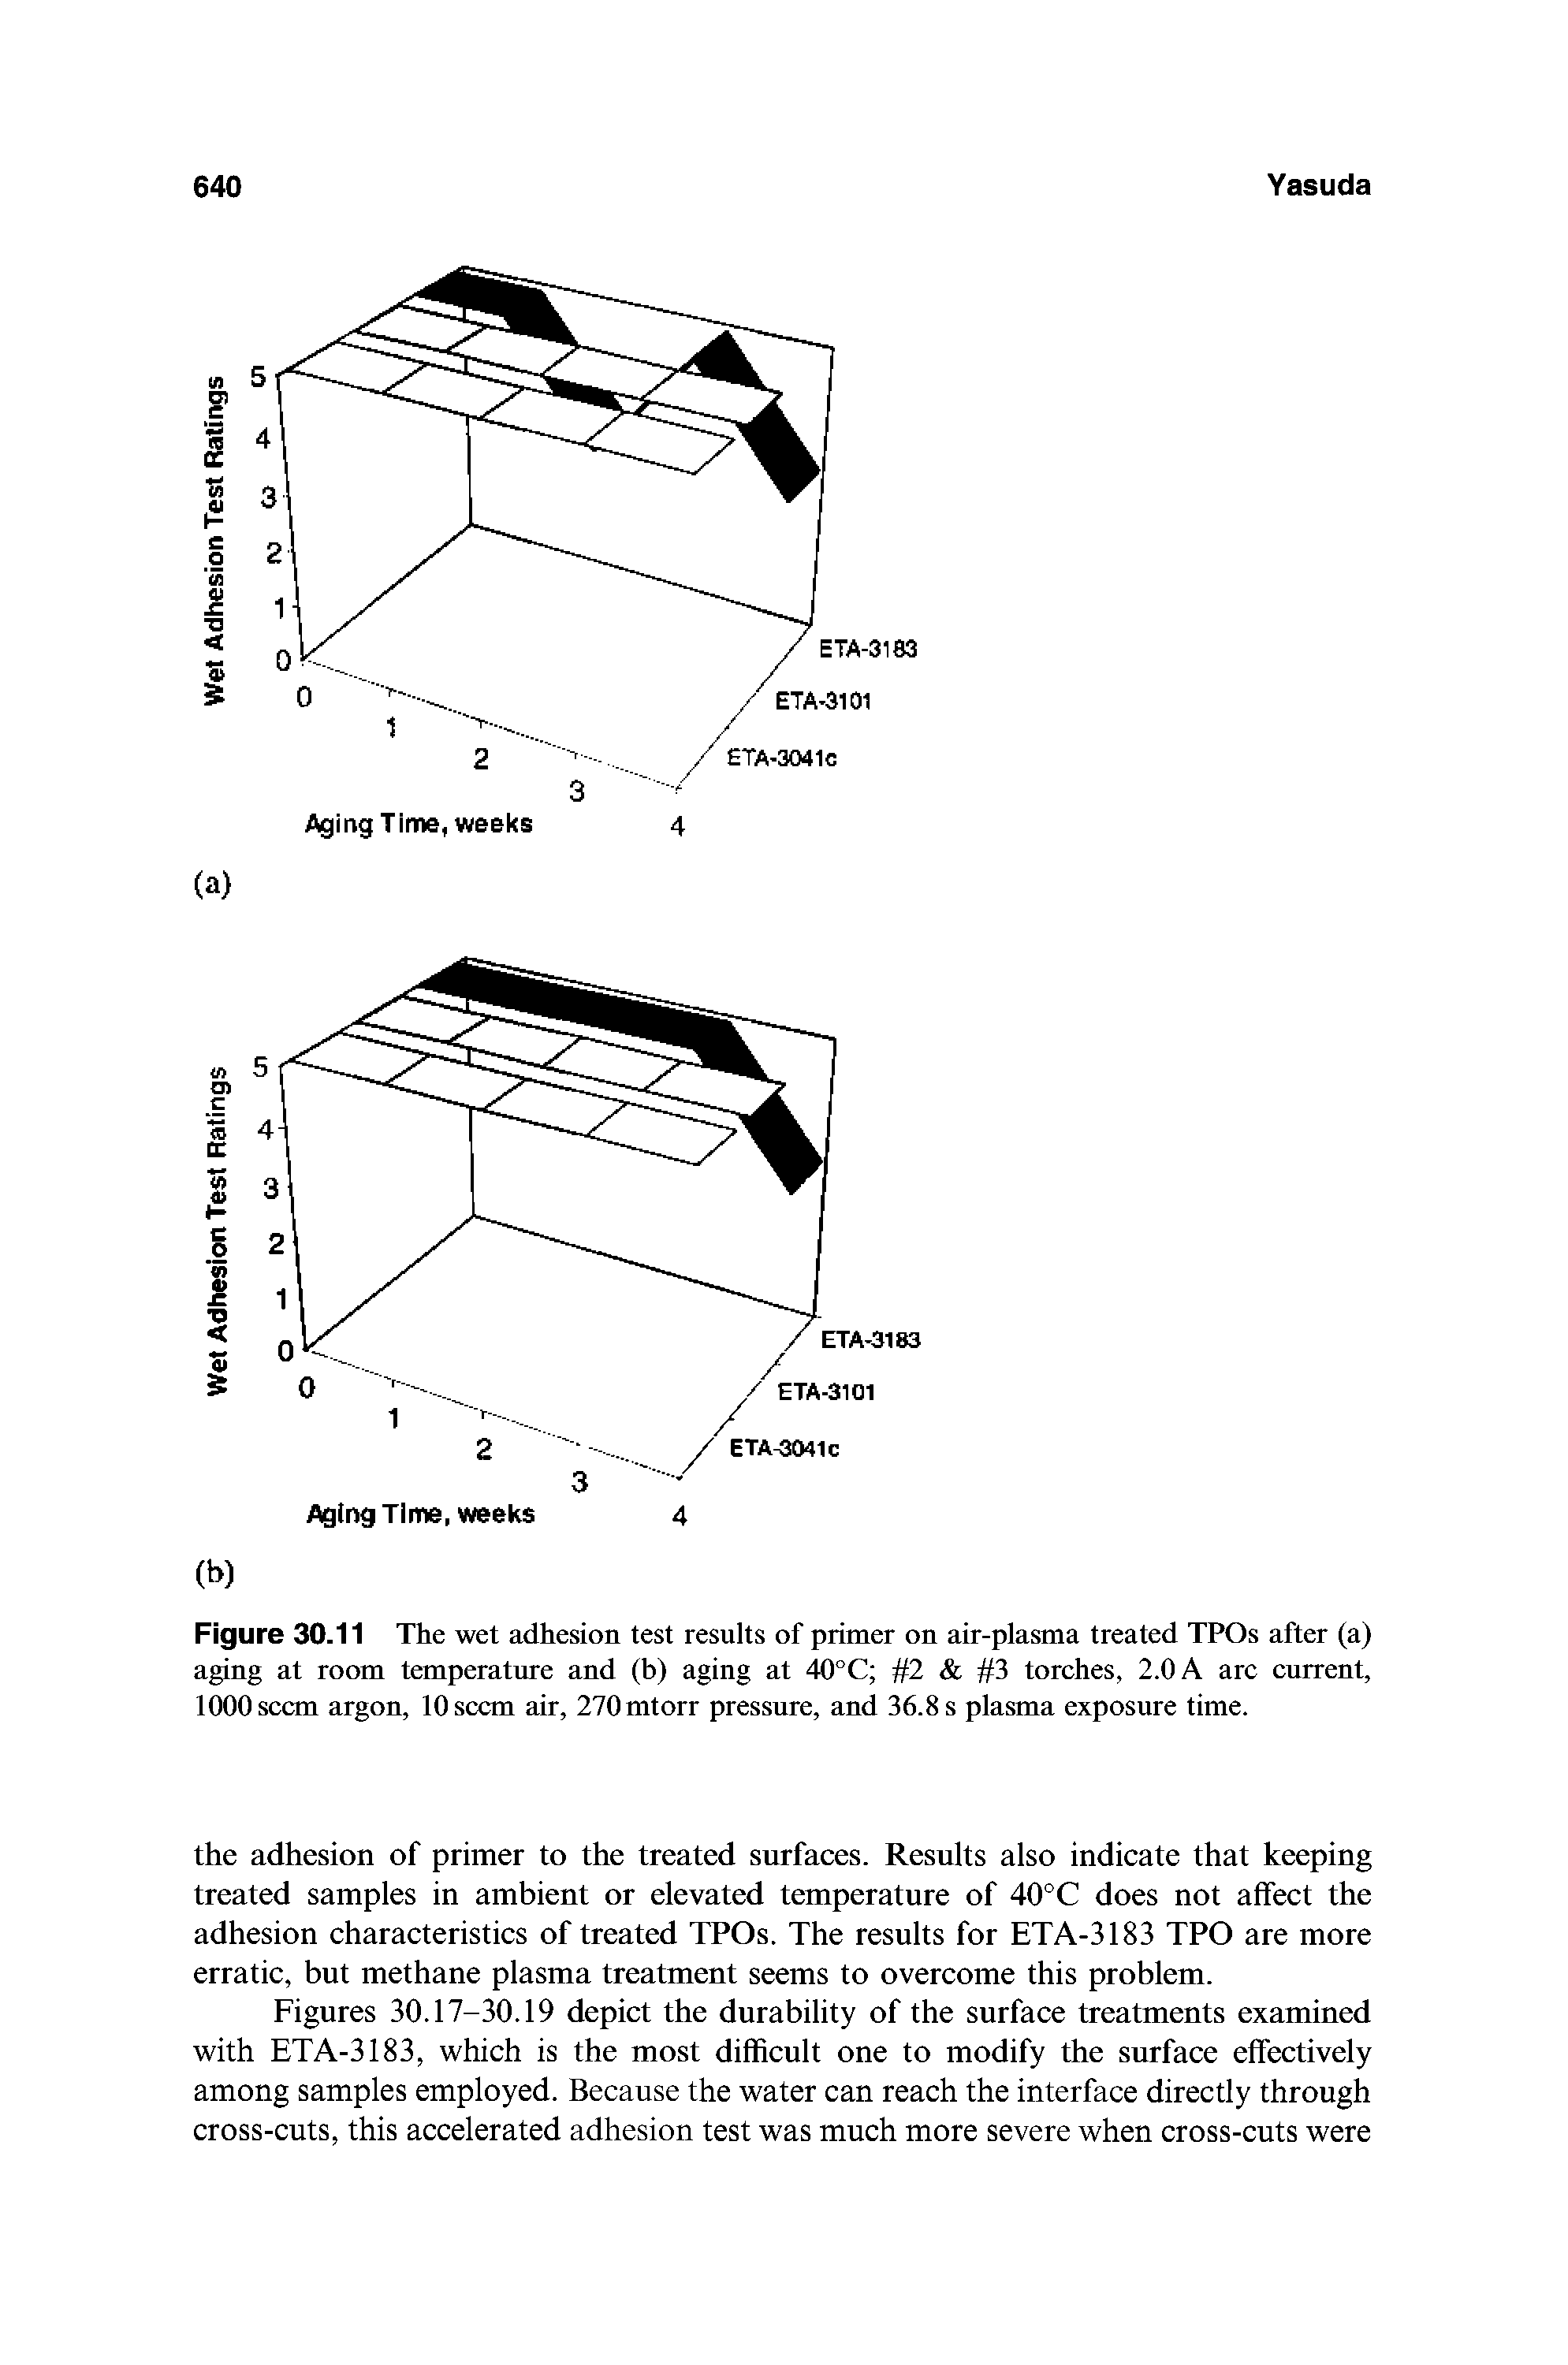 Figure 30.11 The wet adhesion test results of primer on air-plasma treated TPOs after (a) aging at room temperature and (b) aging at 40°C 2 3 torches, 2.0 A arc current, 1000 seem argon, 10 seem air, 270mtorr pressure, and 36.8 s plasma exposure time.